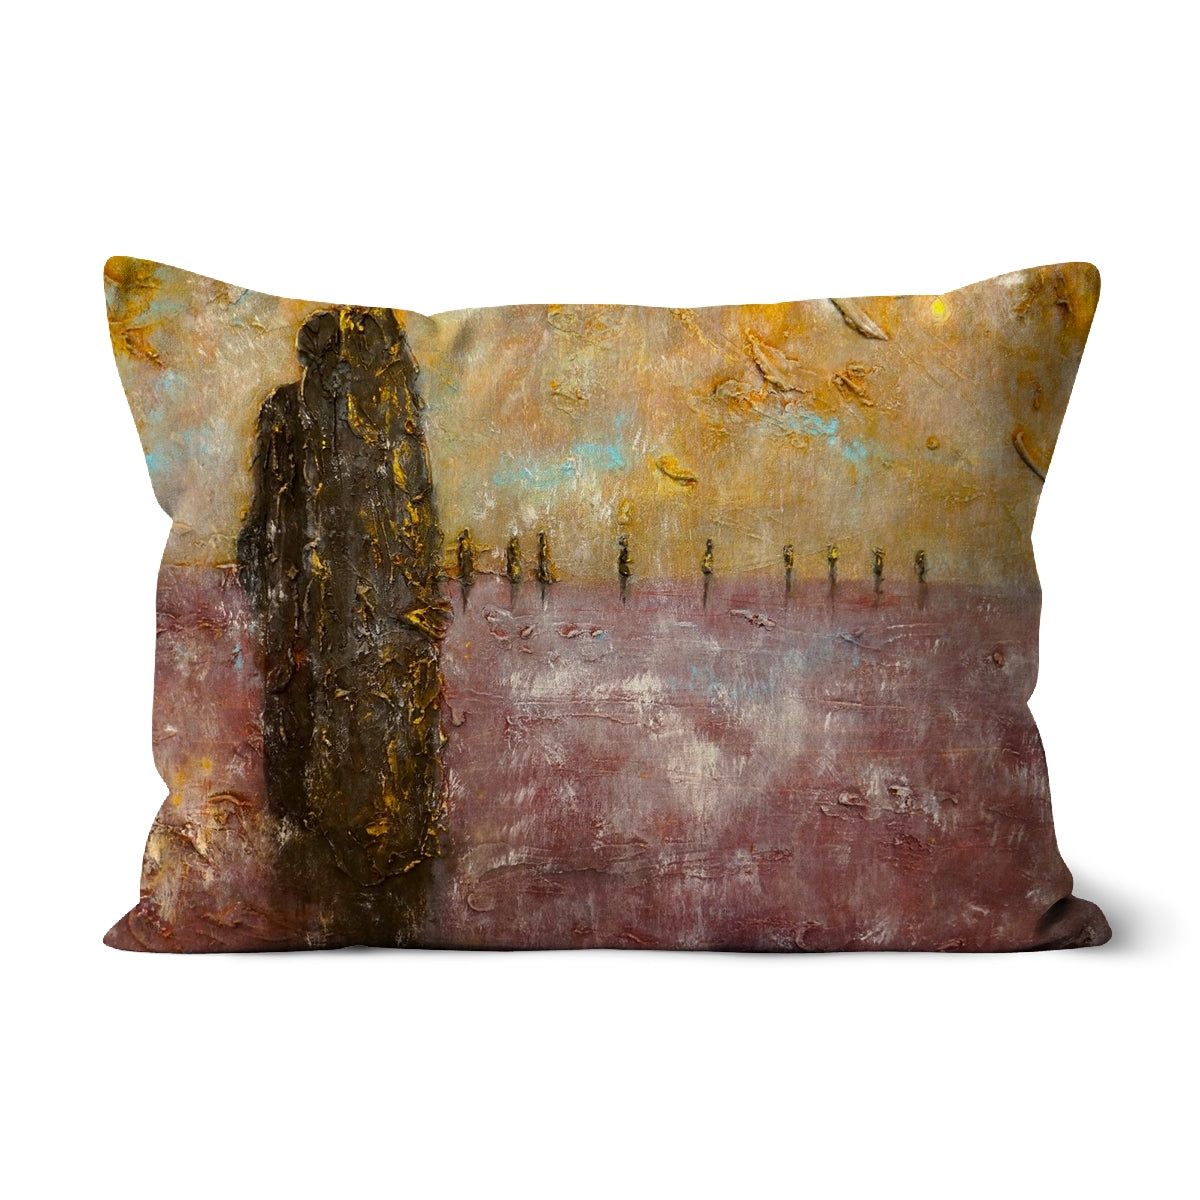 Brodgar Mist Orkney Art Gifts Cushion-Cushions-Orkney Art Gallery-Canvas-19"x13"-Paintings, Prints, Homeware, Art Gifts From Scotland By Scottish Artist Kevin Hunter